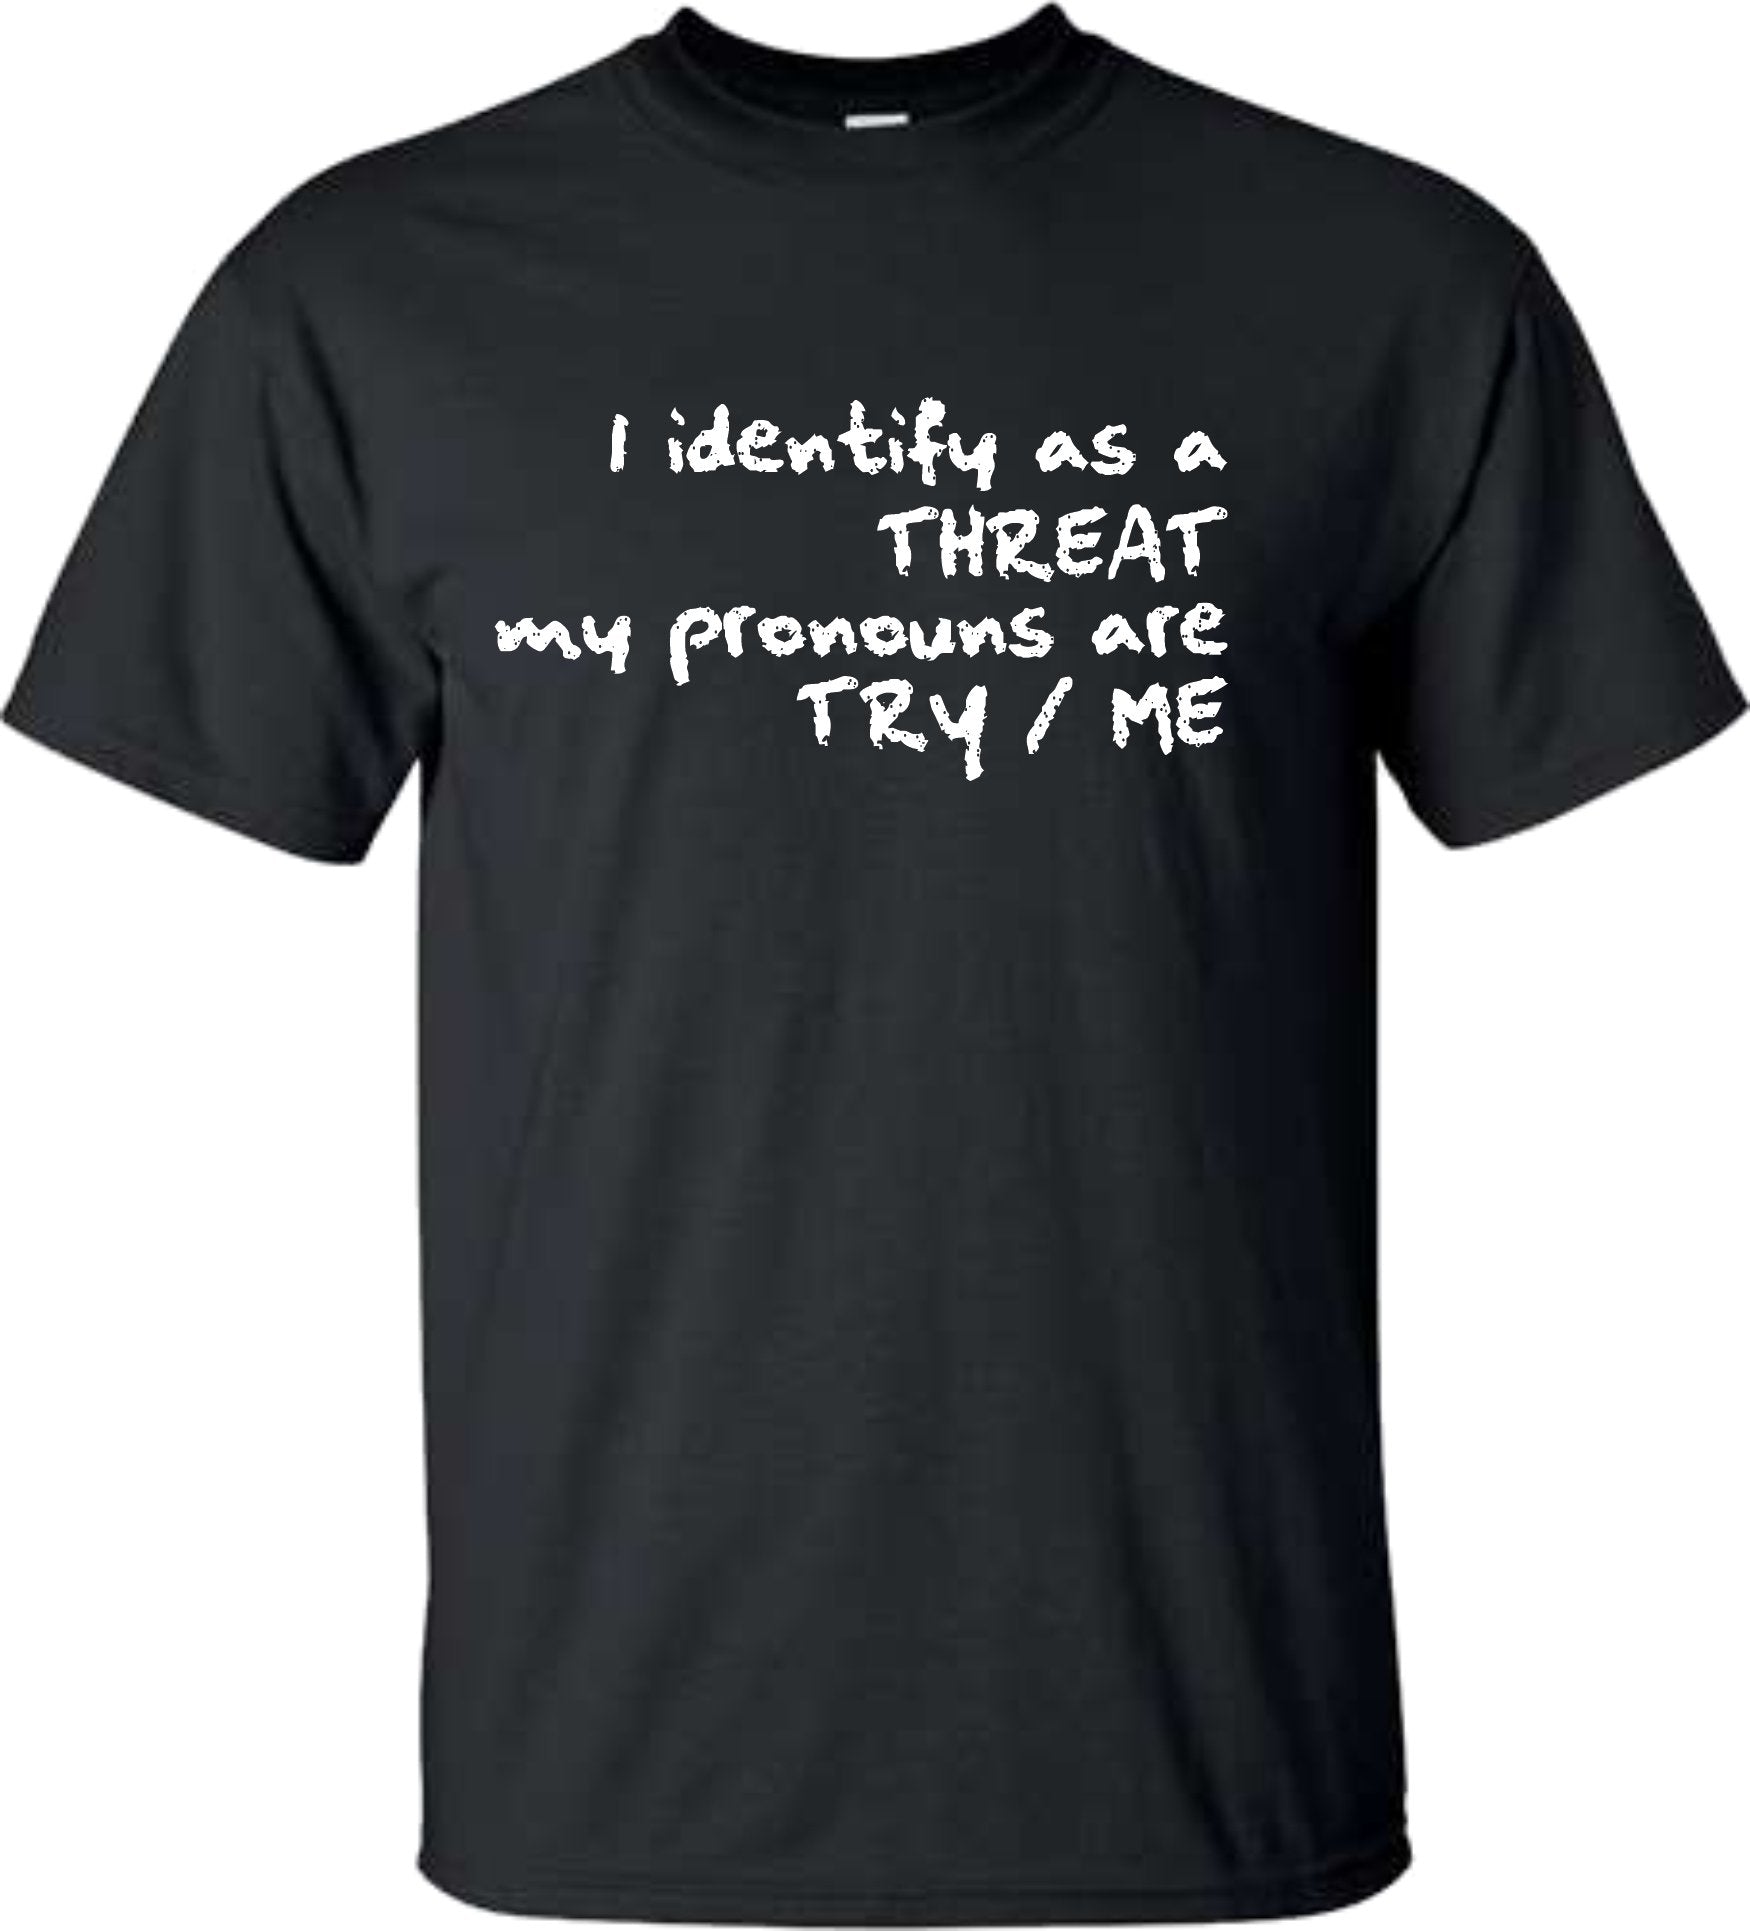 I identify as a threat, my pronouns are try/me t shirt - SBS T Shop